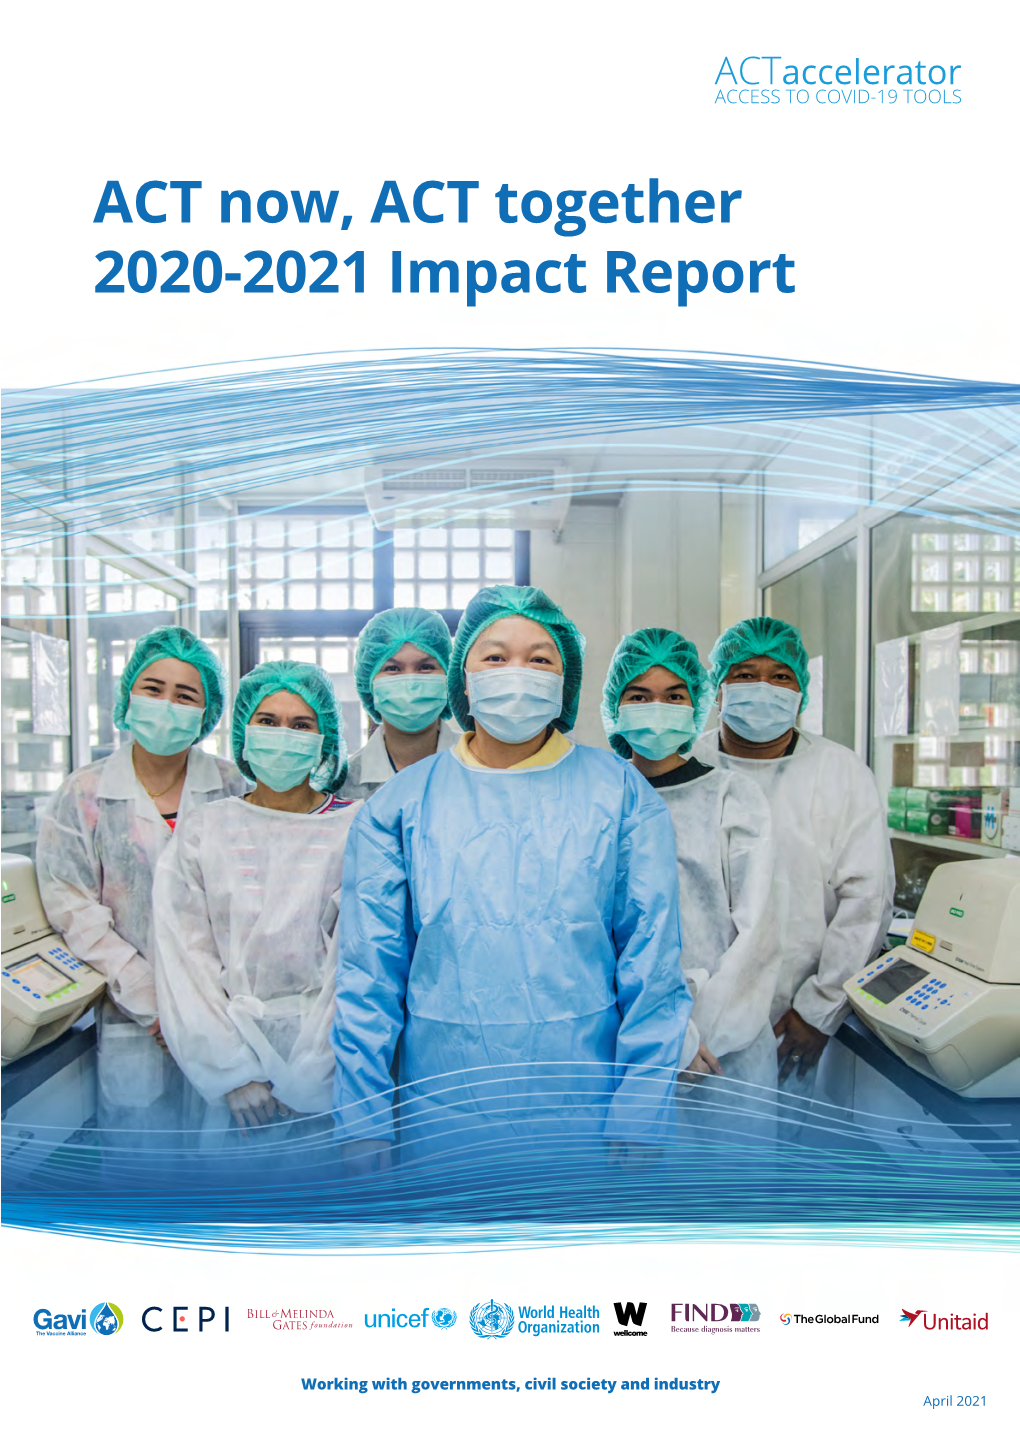 ACT Now, ACT Together 2020-2021 Impact Report